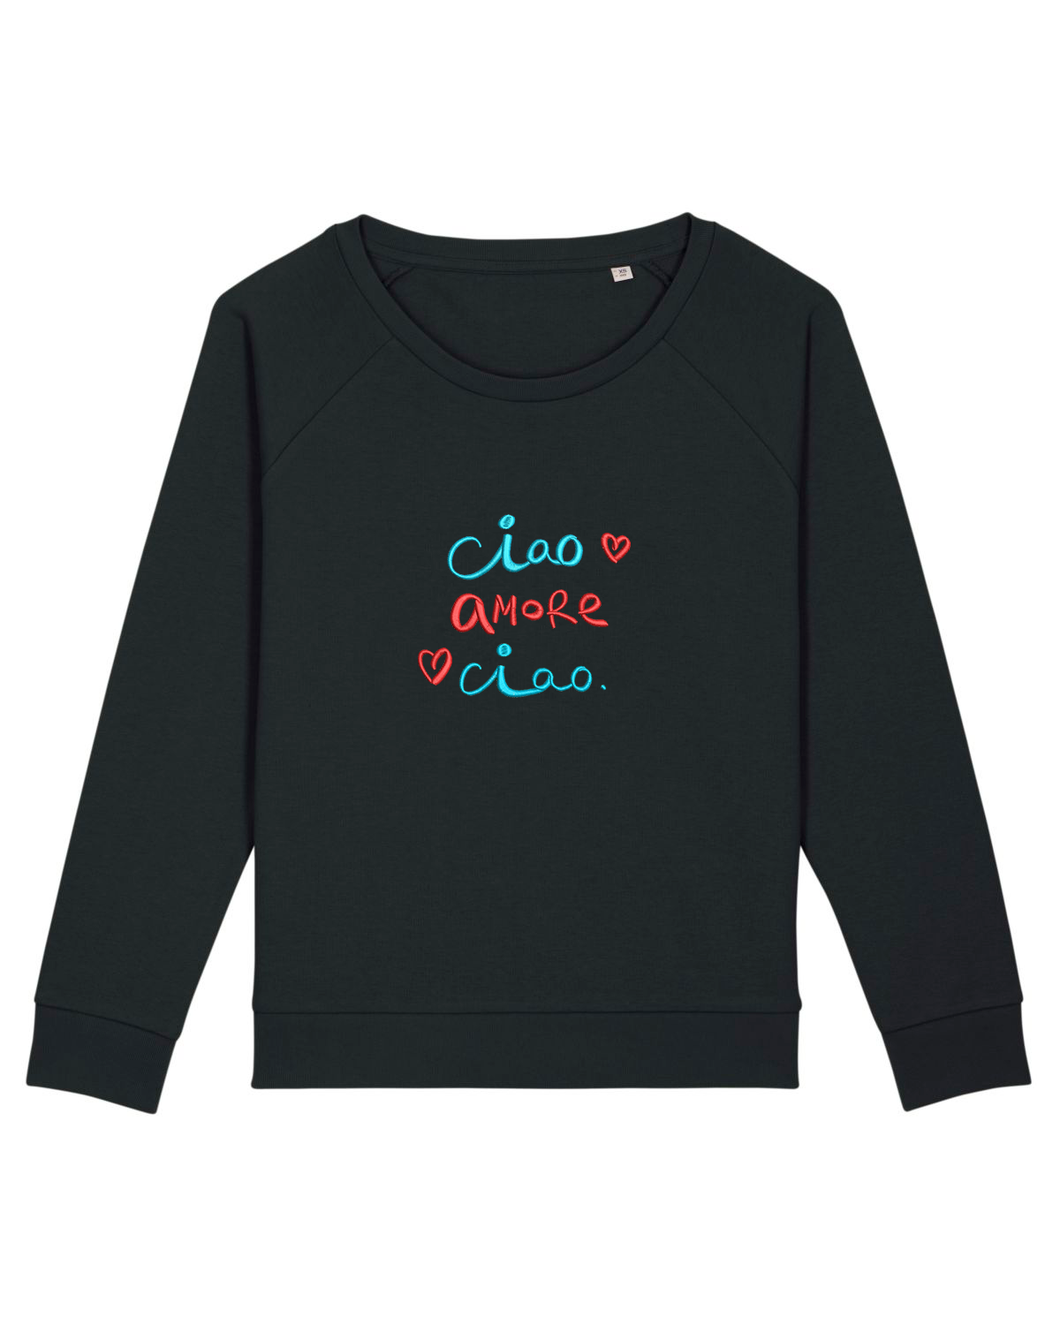 Ciao AMORE Ciao - Embroidered WOMEN'S RELAXED FIT SWEATSHIRT